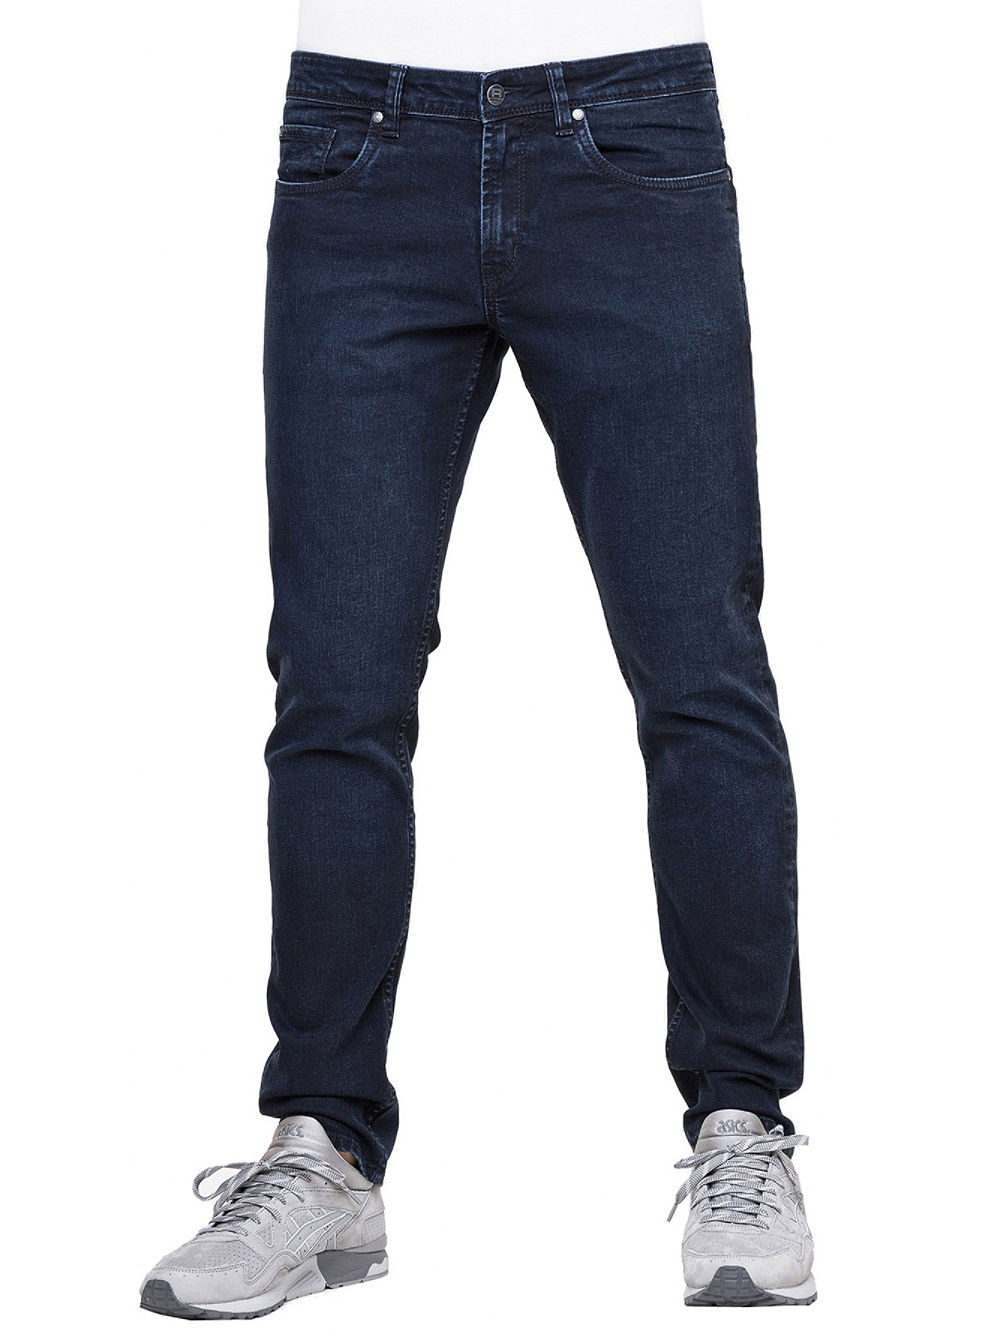 Buy REELL Spider Jeans online at blue-tomato.com